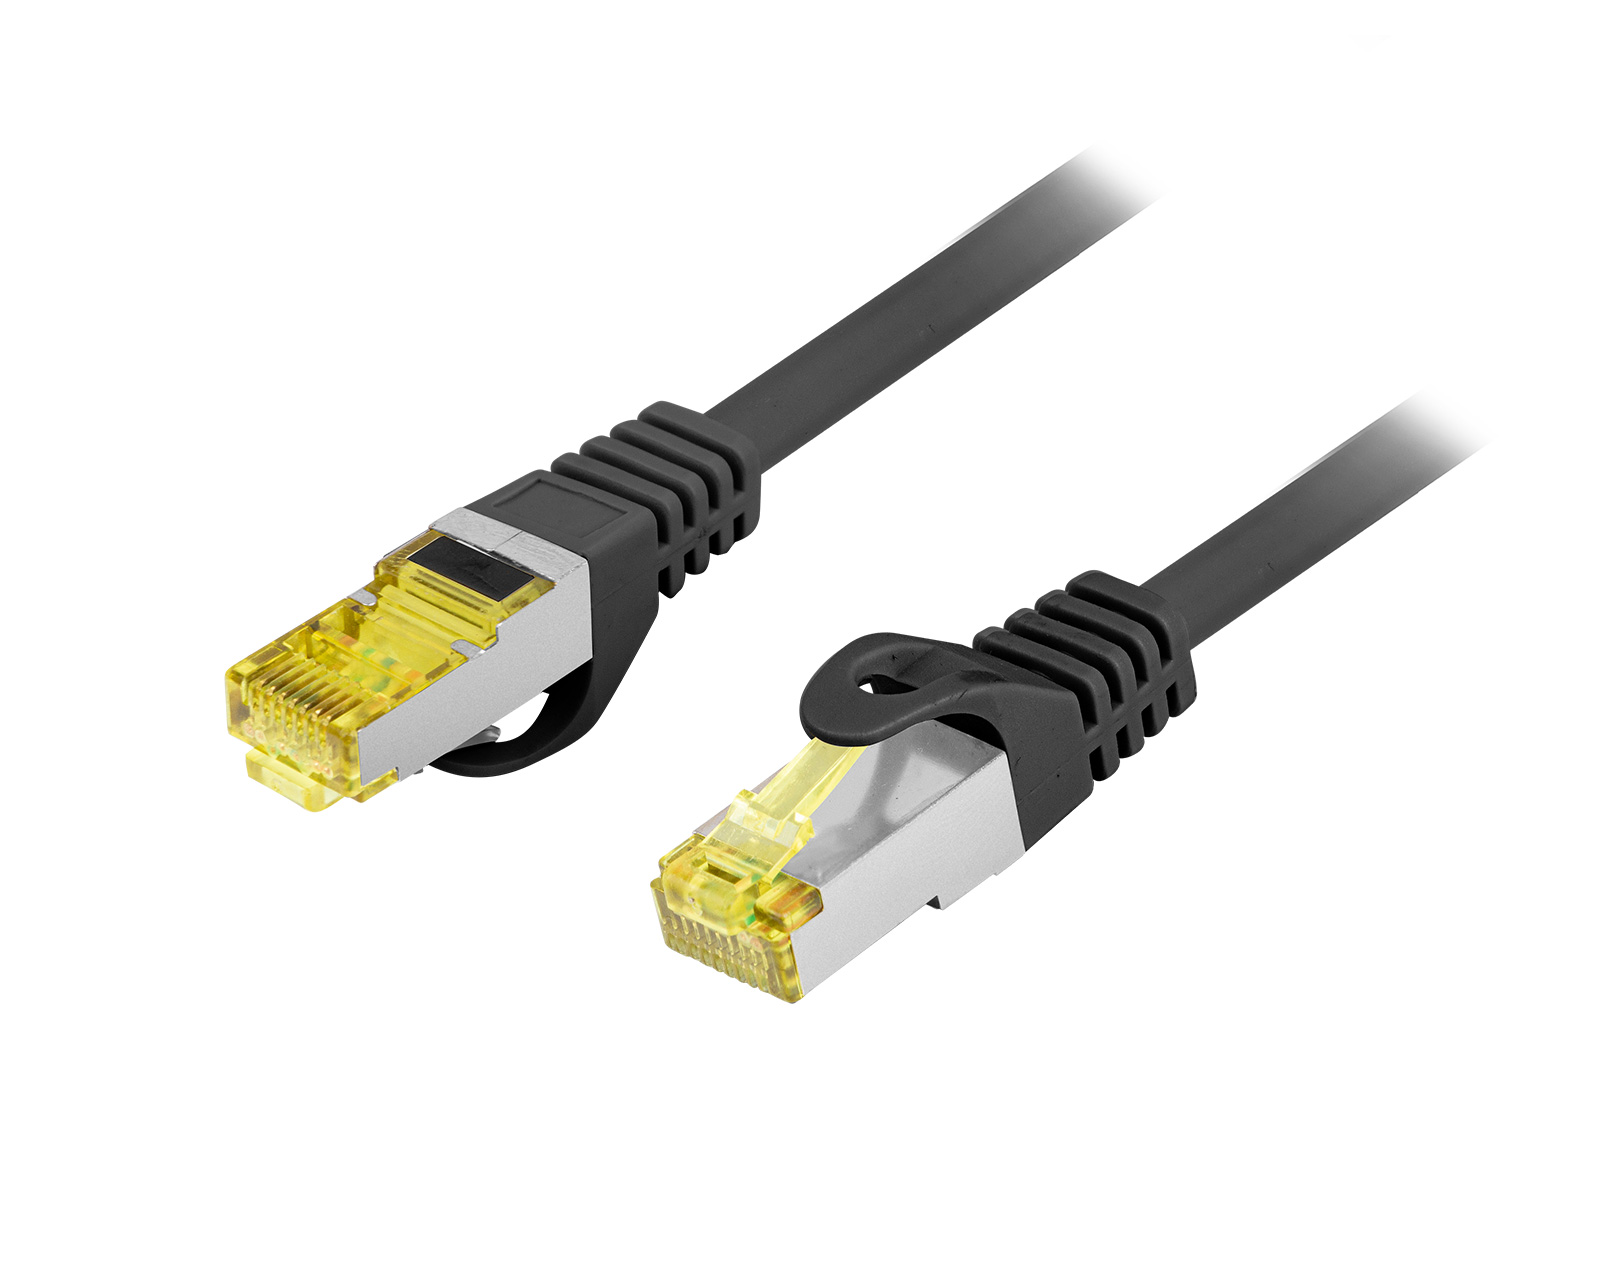 Supra Cat 8 Network Patch Cable - Ethernet/LAN cable